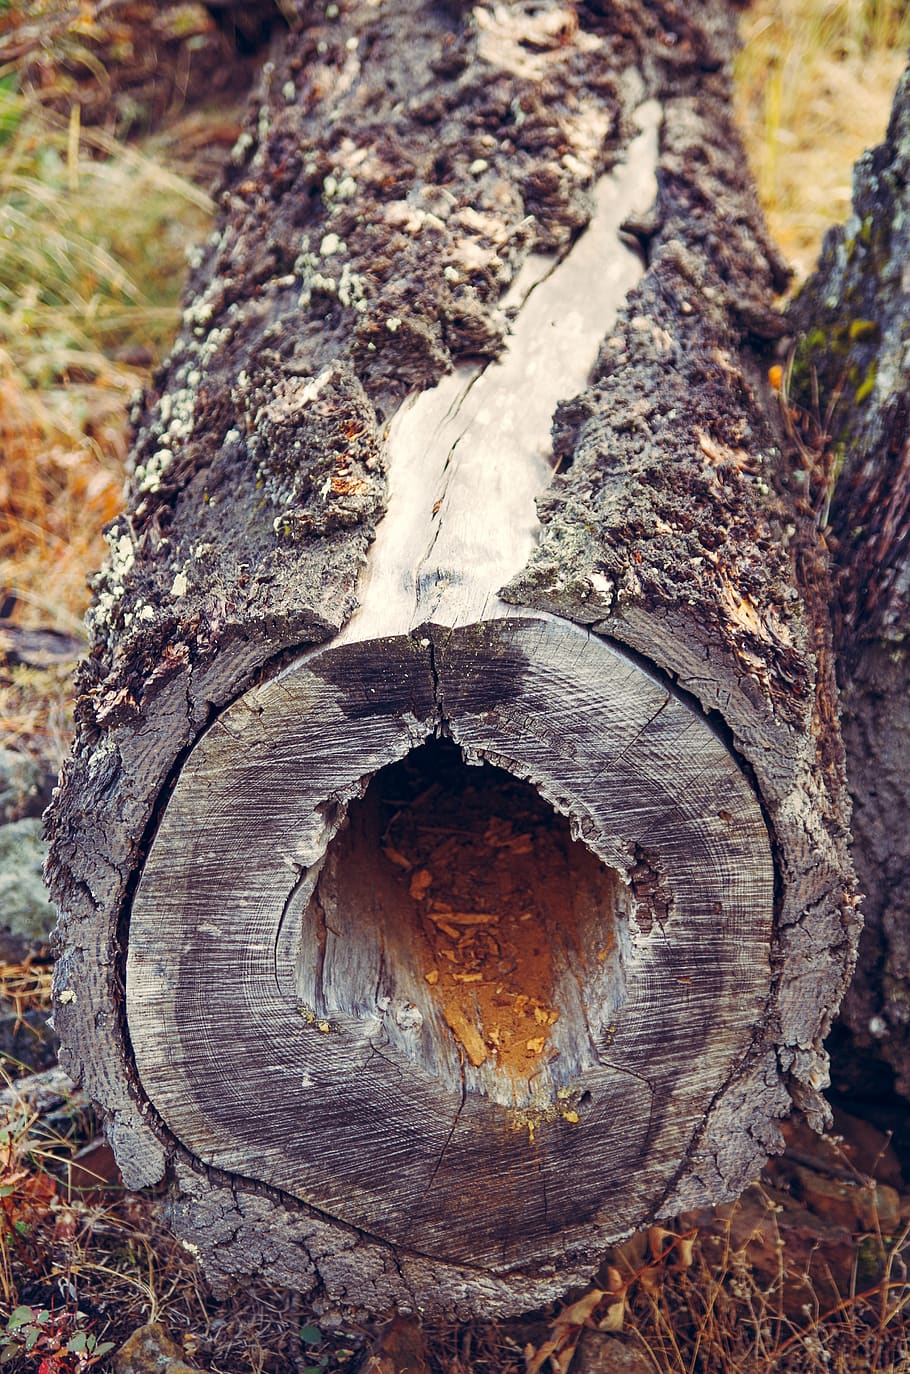 hollow log, log, wood, tree, forest, bark, tree trunk, trunk, close-up, textured